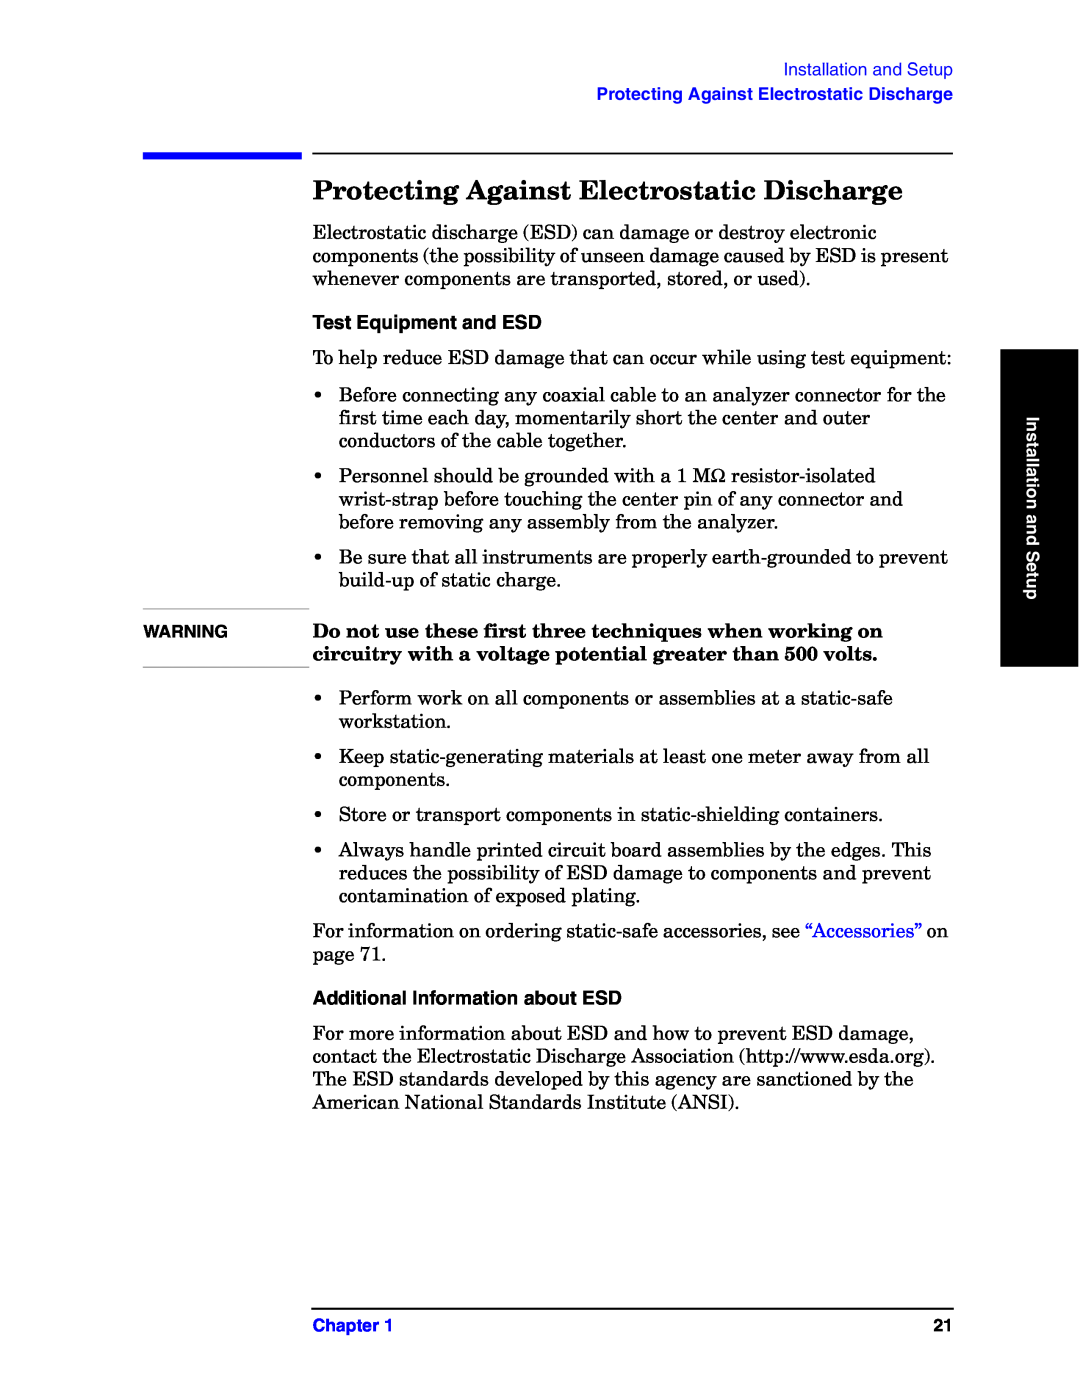 Agilent Technologies E4440A manual Protecting Against Electrostatic Discharge, Test Equipment and ESD 